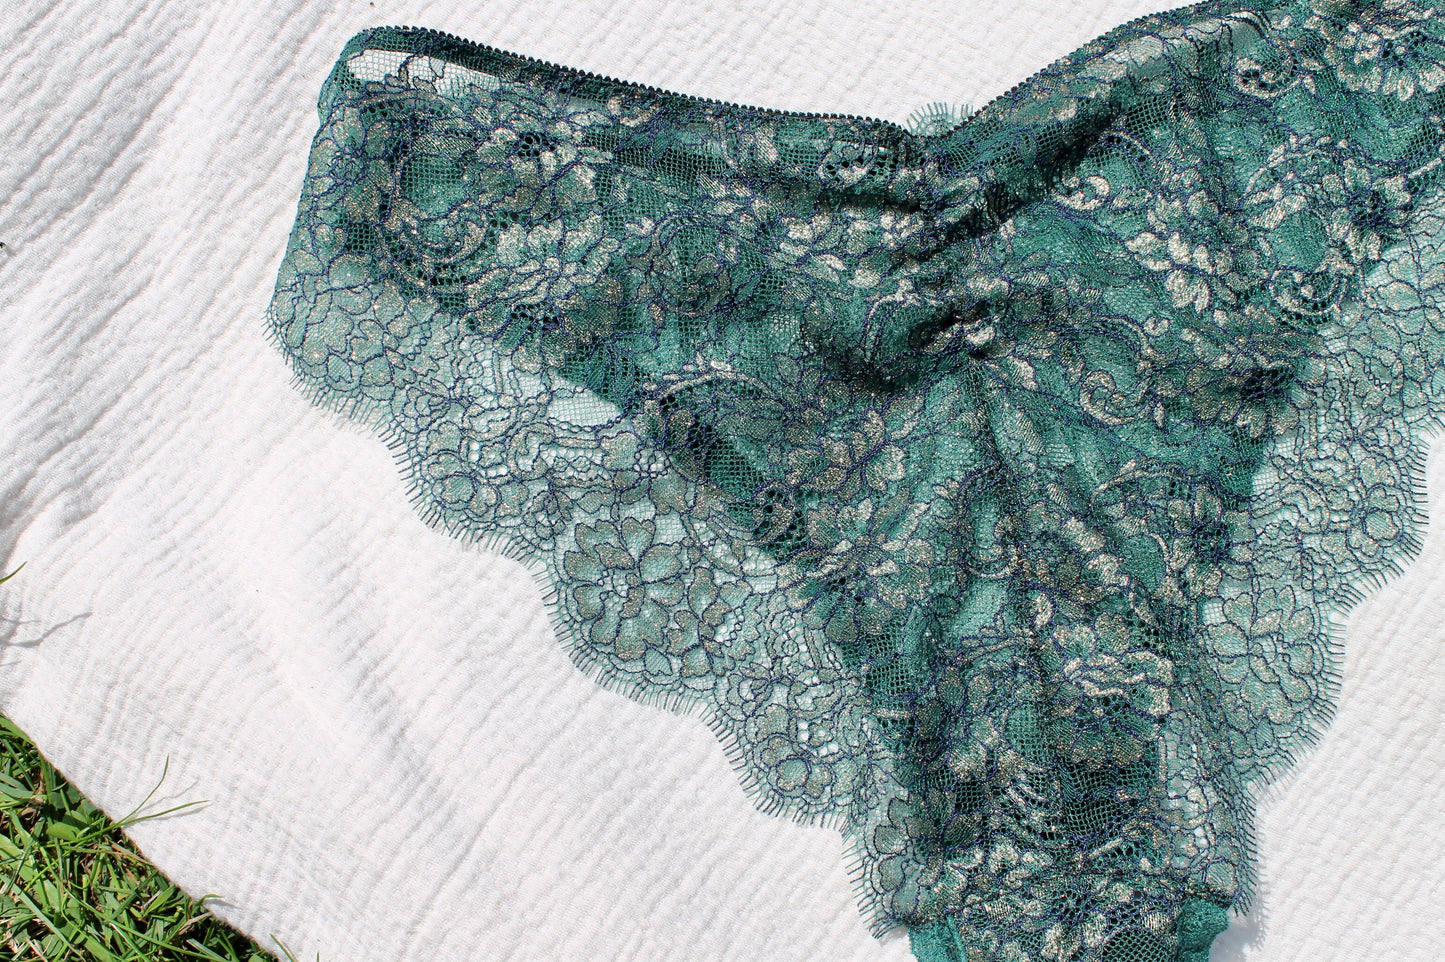 Green and gold lace underwear/ knickers